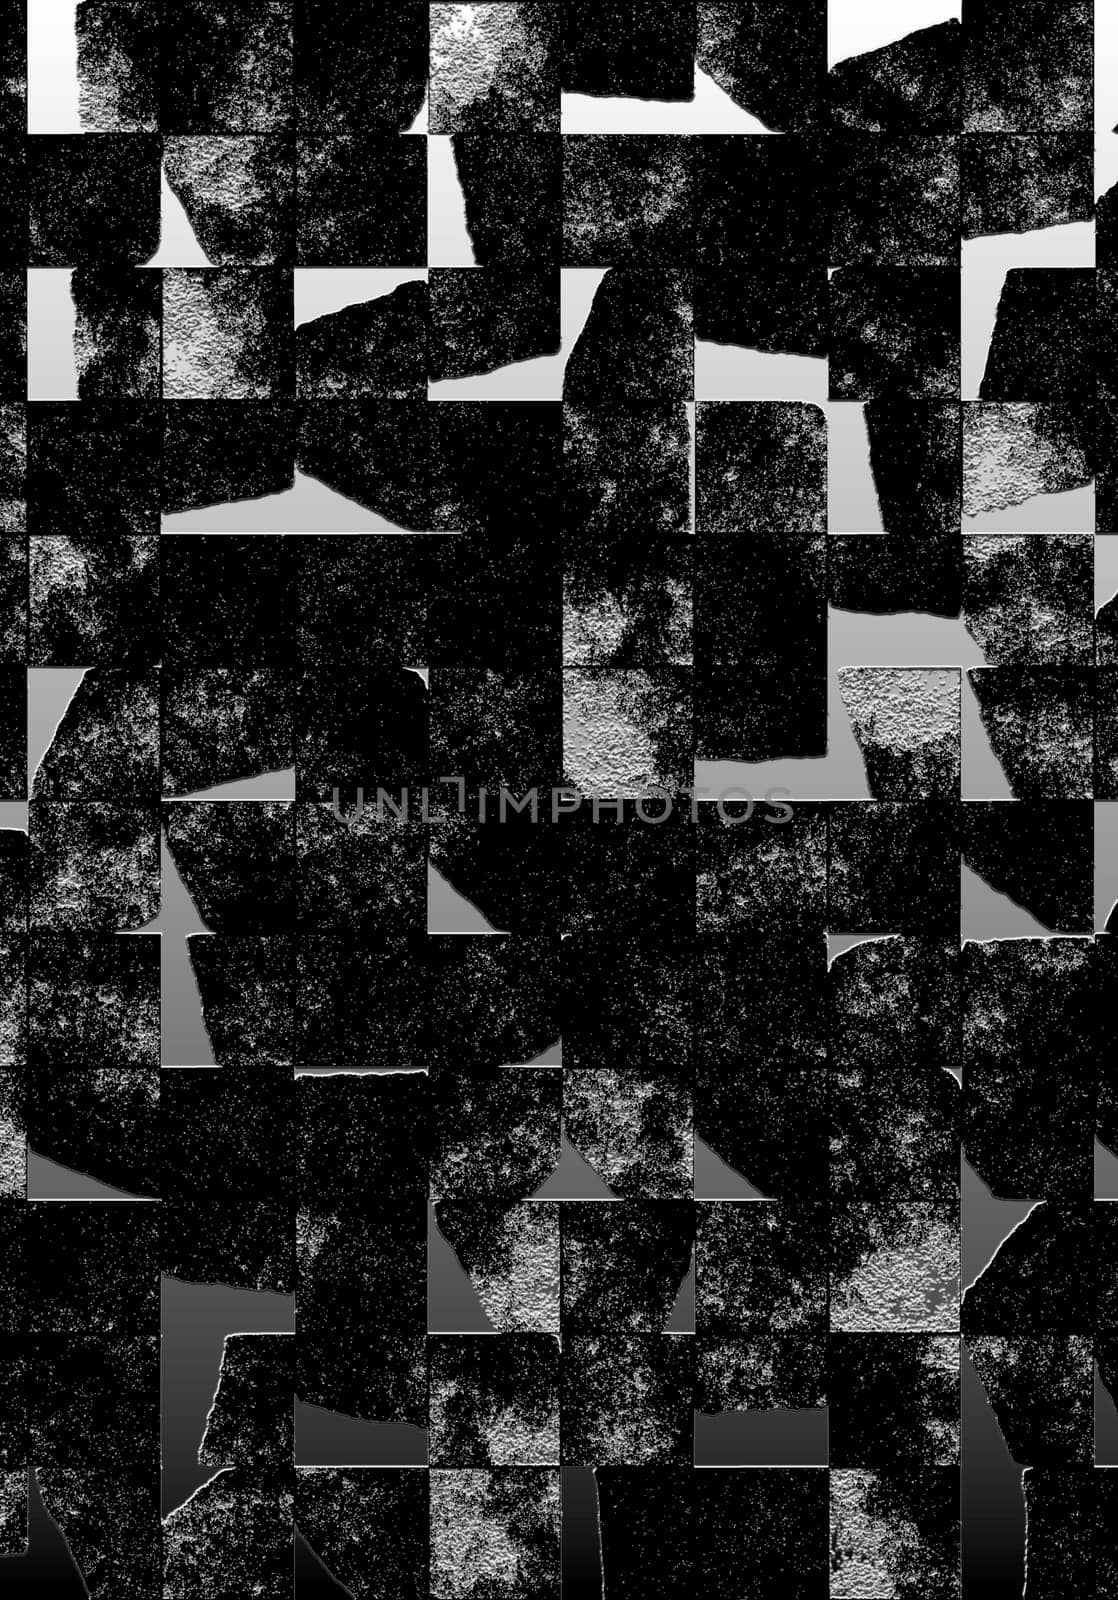 Background image of small square pieces of black on a white background by Mastak80